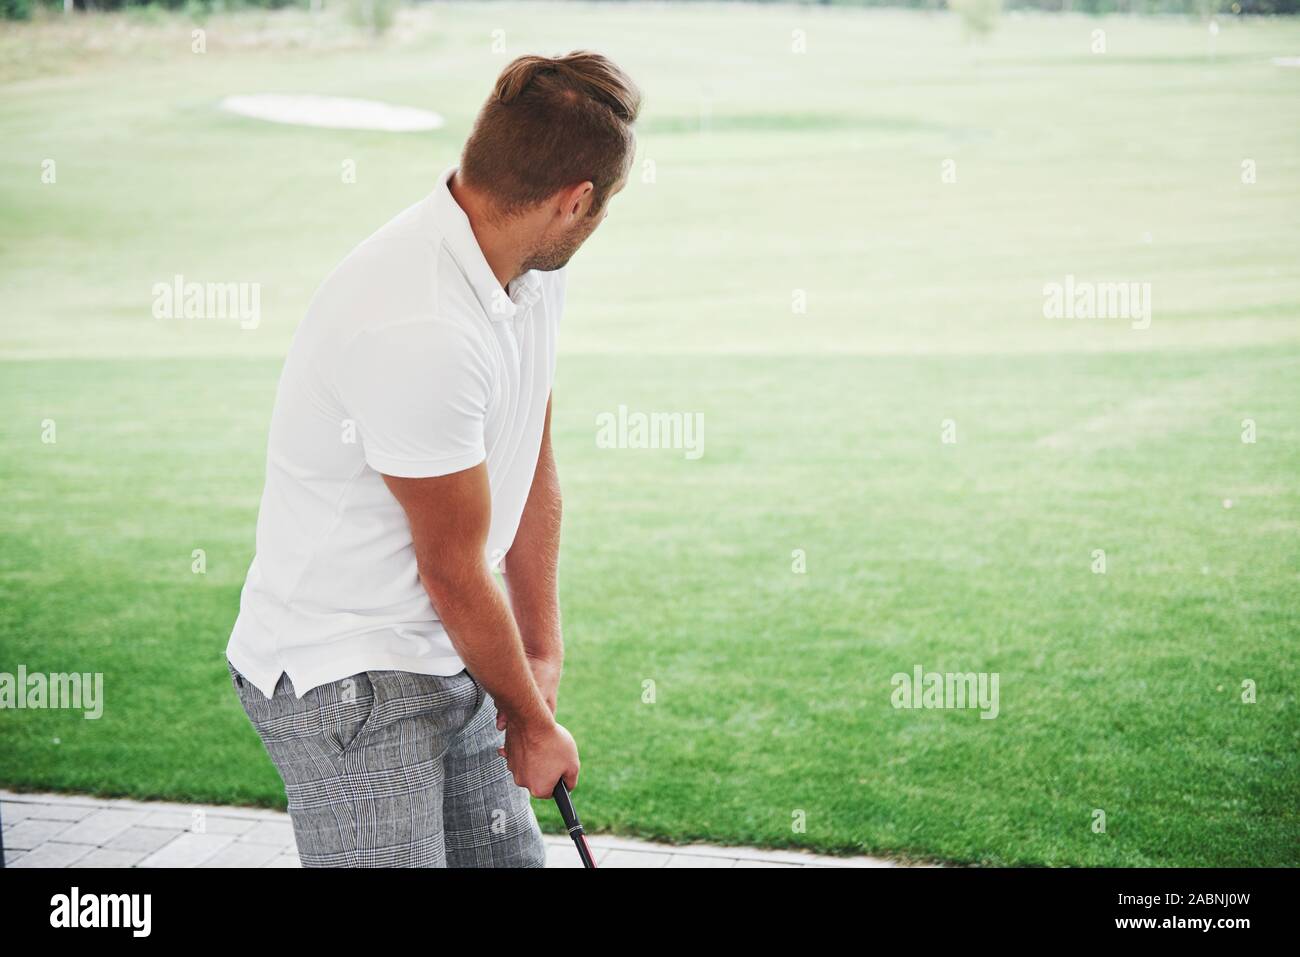 Pro golf player aiming shot with club on course. Male golfer on putting green about to take the shot, rear view Stock Photo